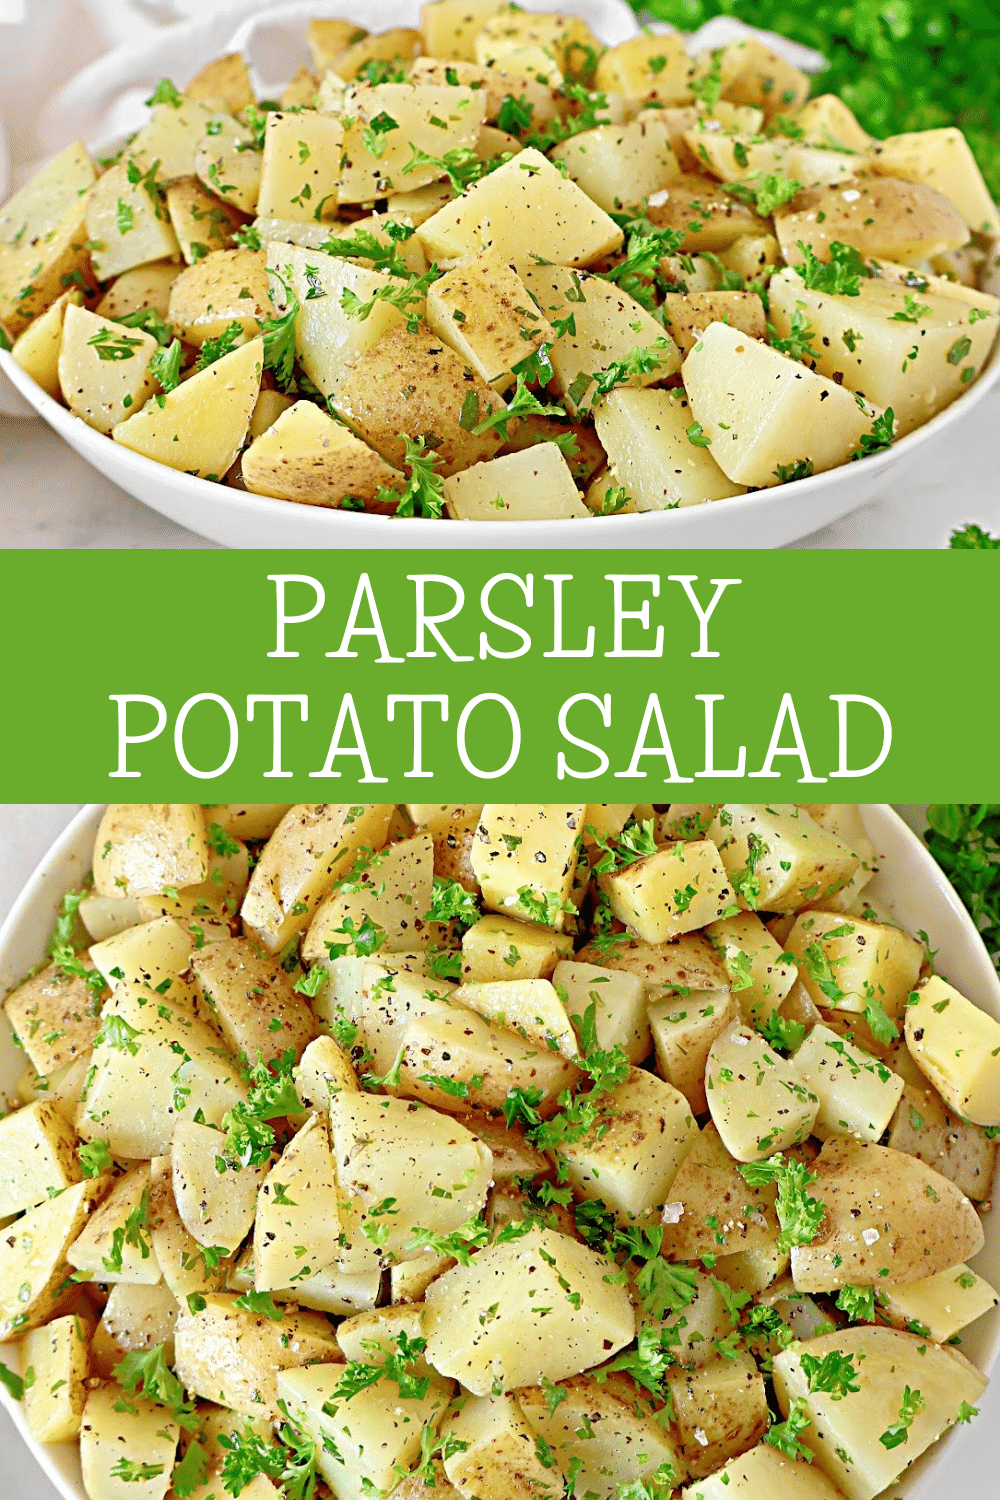 Parsley Potato Salad ~ Warm potatoes mixed with fragrant parsley and tangy oil and vinegar dressing. Quick and easy recipe. Vegetarian and Vegan. via @thiswifecooks